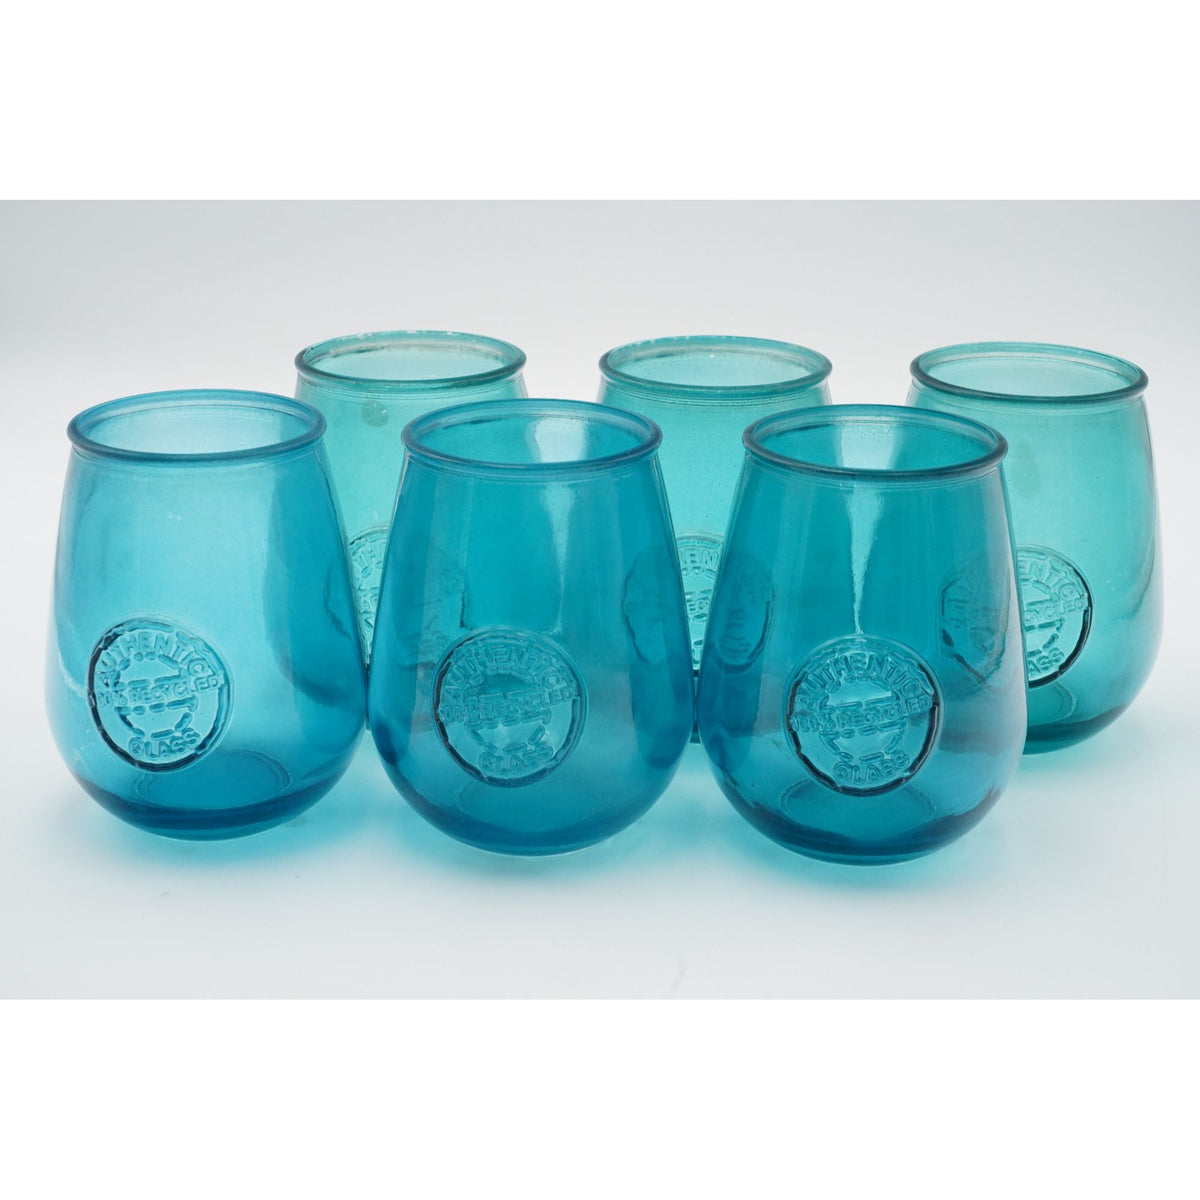 Vintage San Miguel Authentic 100% Recycled Wine Glasses Aqua & Teal Set of 6